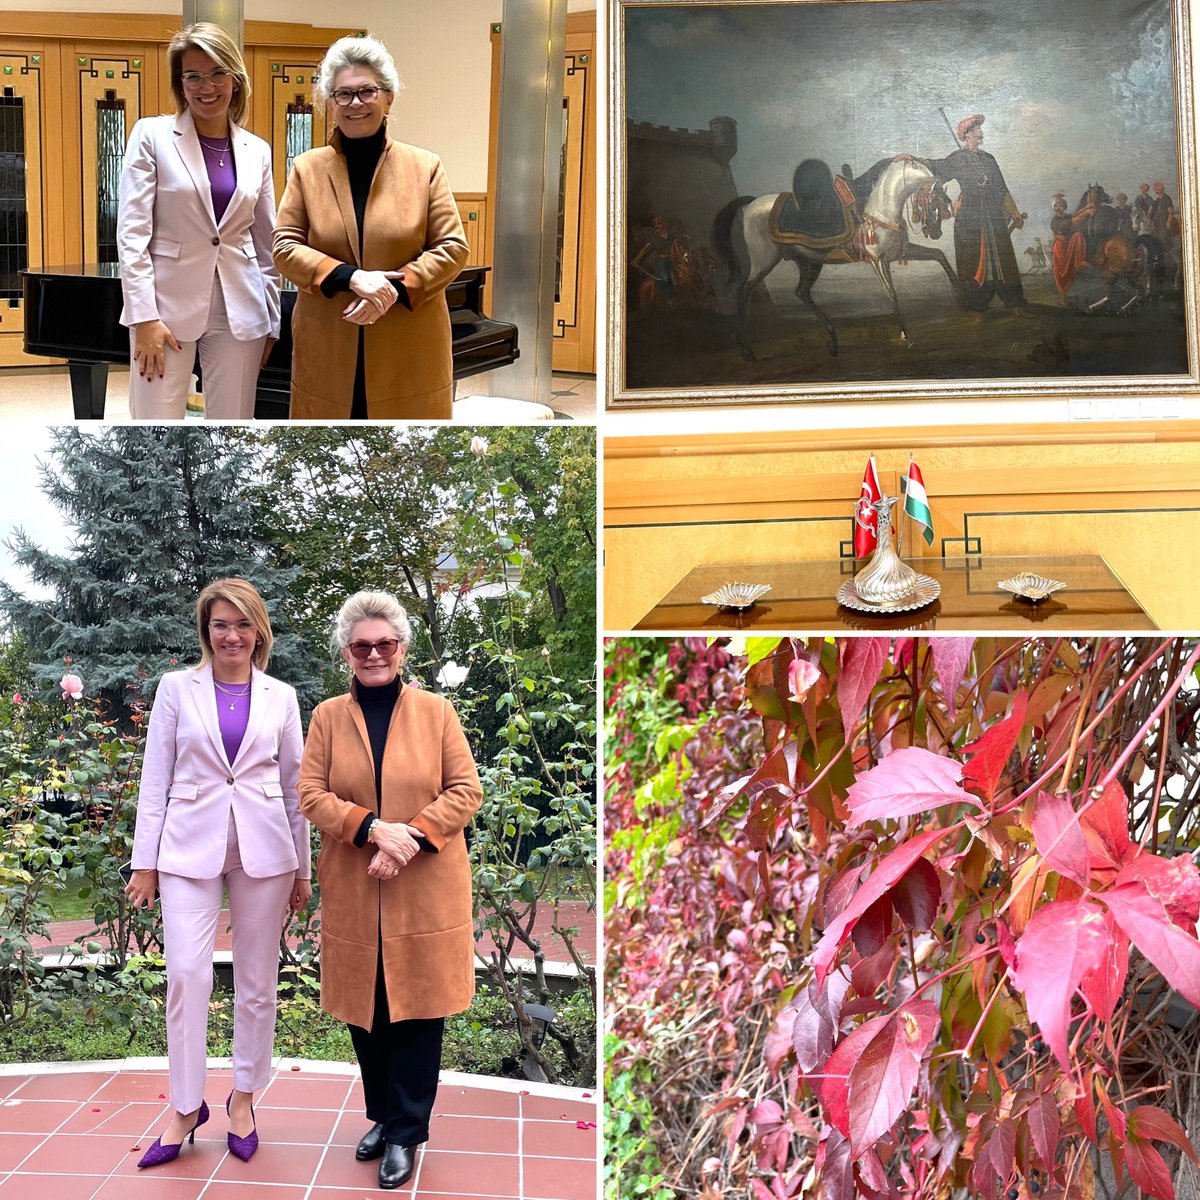 Thank you for the invitation Amb.of Türkiye @GulsenKaranis . Had an inspiring and fruitful conversation on women in diplomacy and possible collaboration while visiting the beautiful rose garden of the Residence. #women4diplomacy #education #softpowerdiplomacy #fall 🍂